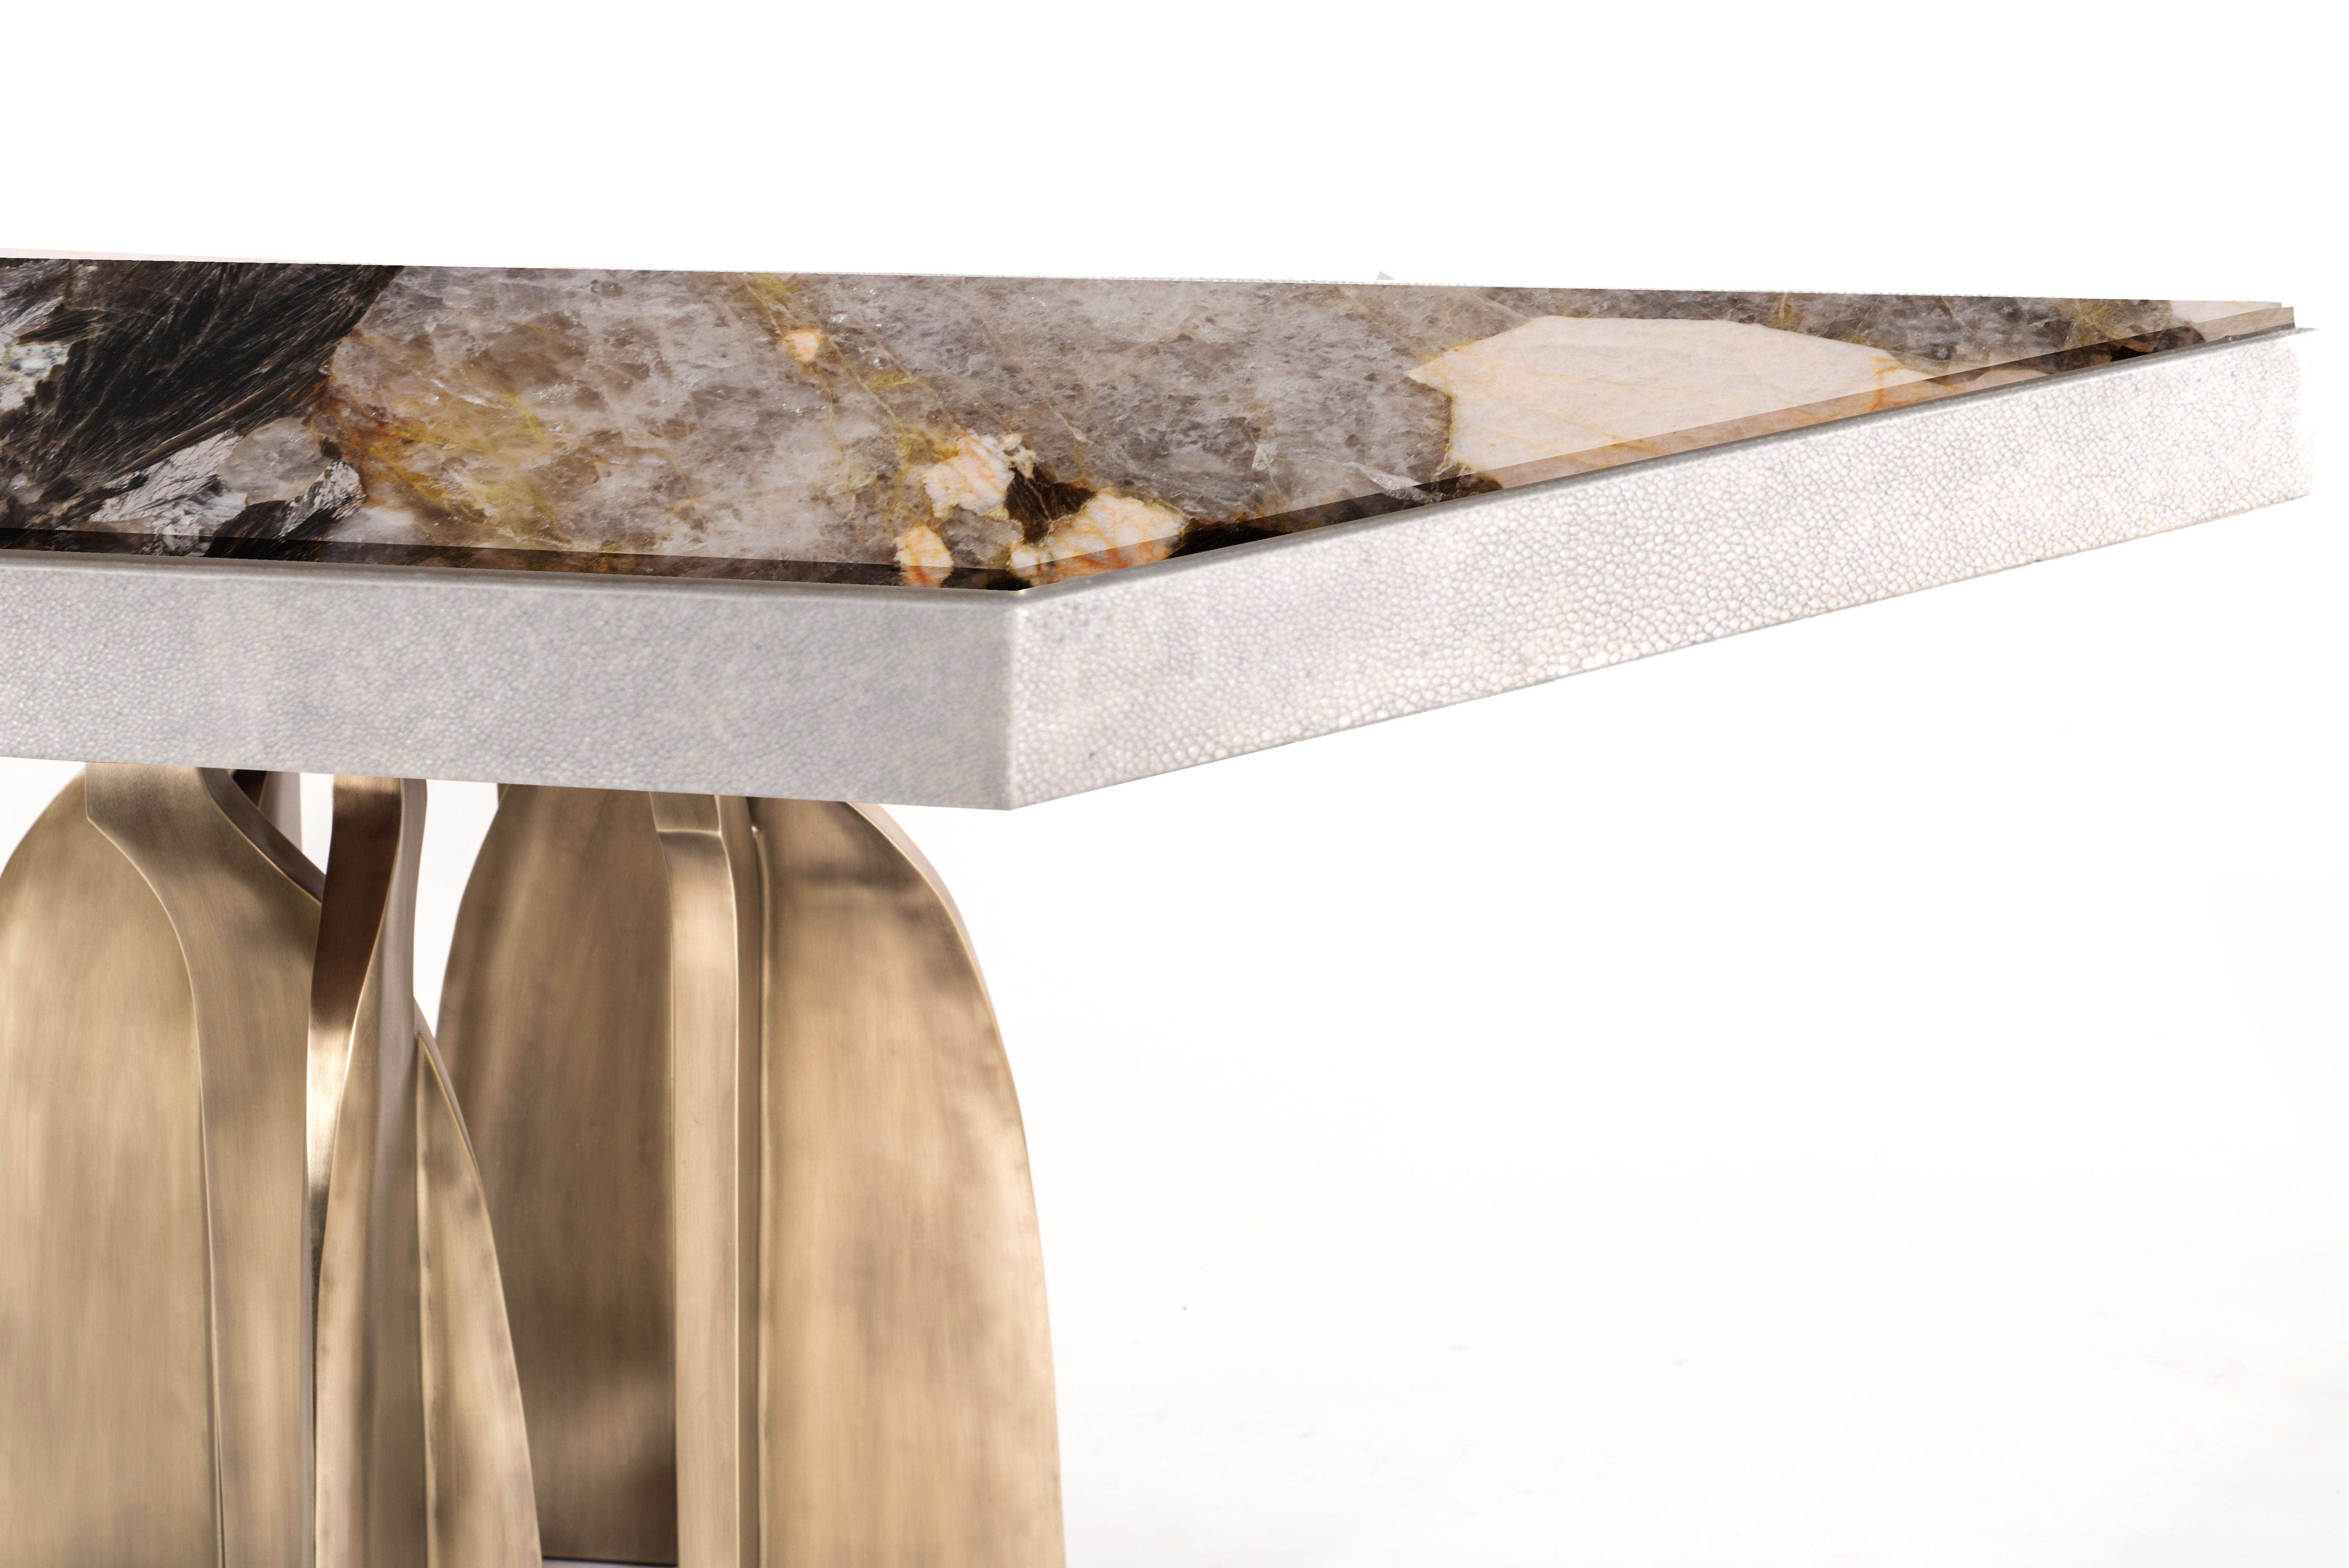 The Chital breakfast table is a stunning piece, a statement in any space. The rectangle Patagonia stone inlaid top is stunning and one of a kind. The semi-precious stone has beautiful color tonalities and silver inserts. The side border of the top